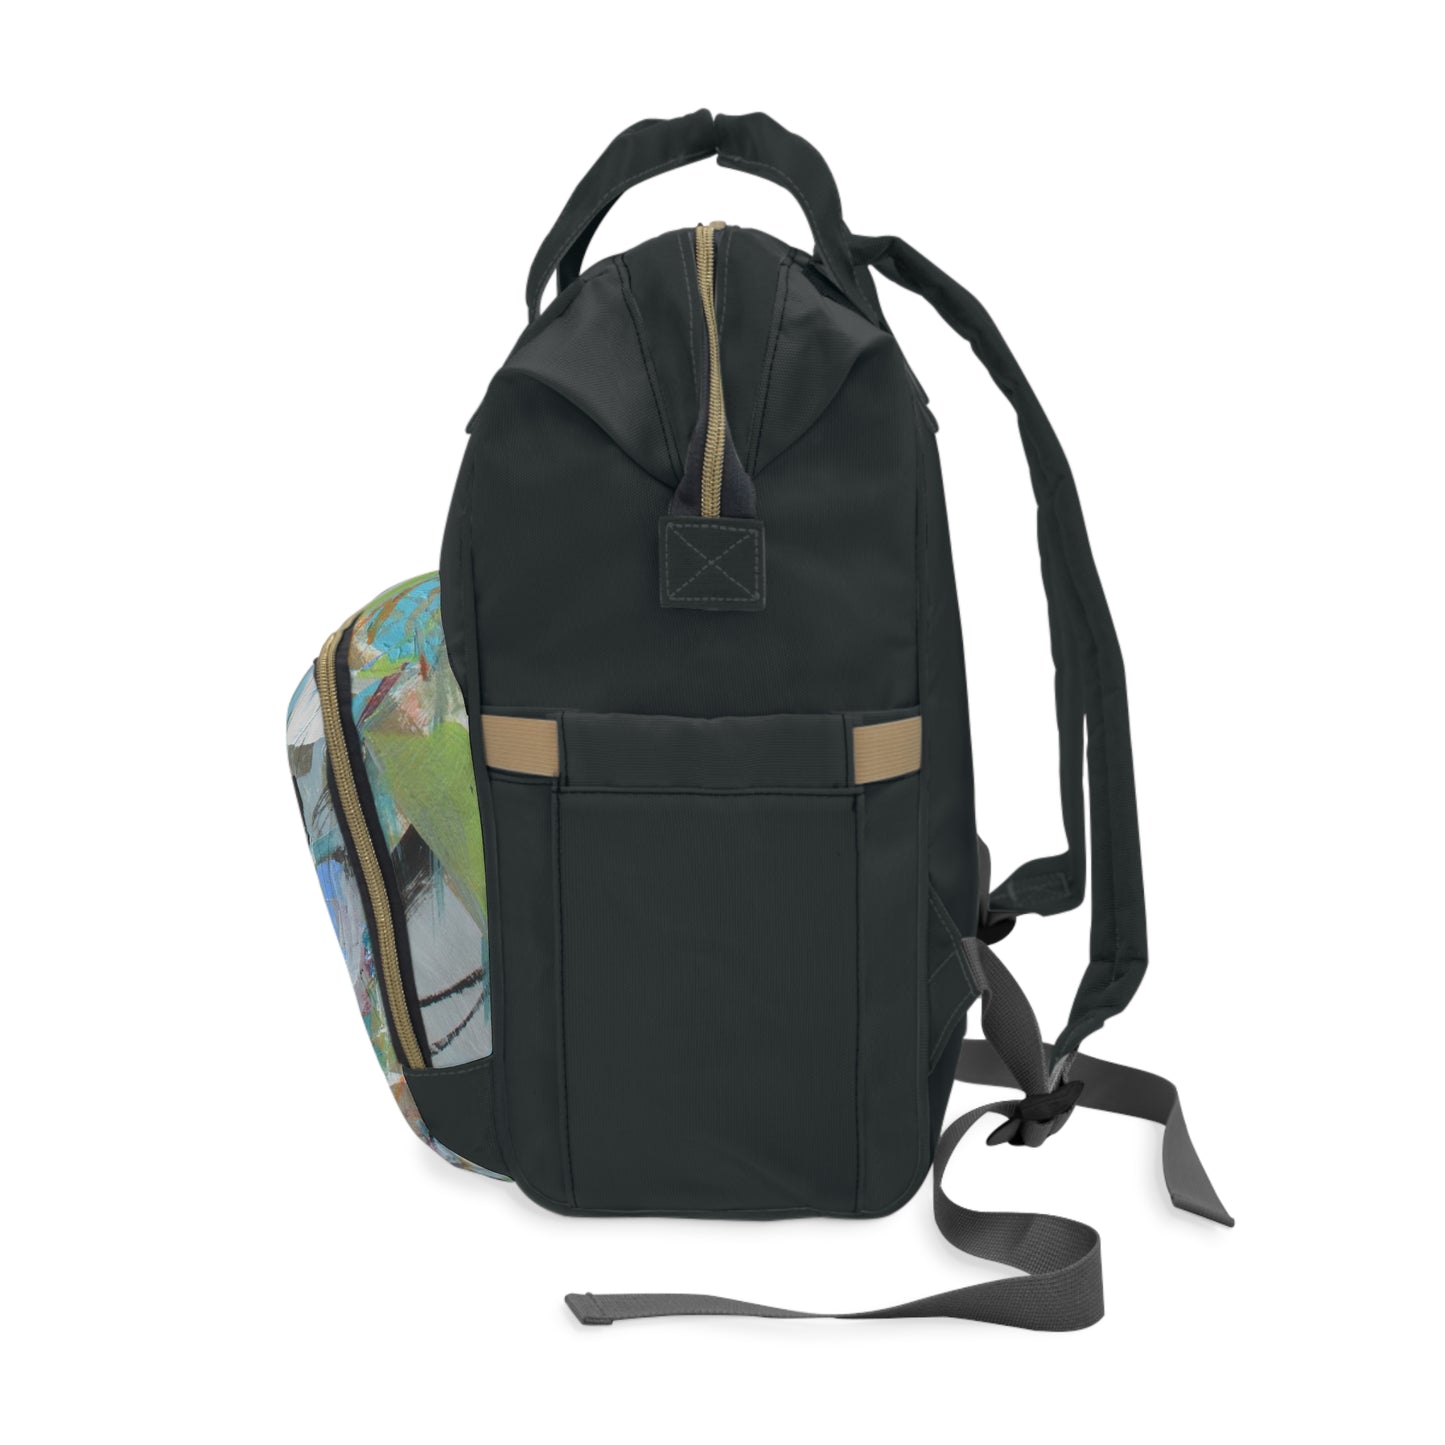 Word of Mouth Simple, Multifunctional Diaper Backpack